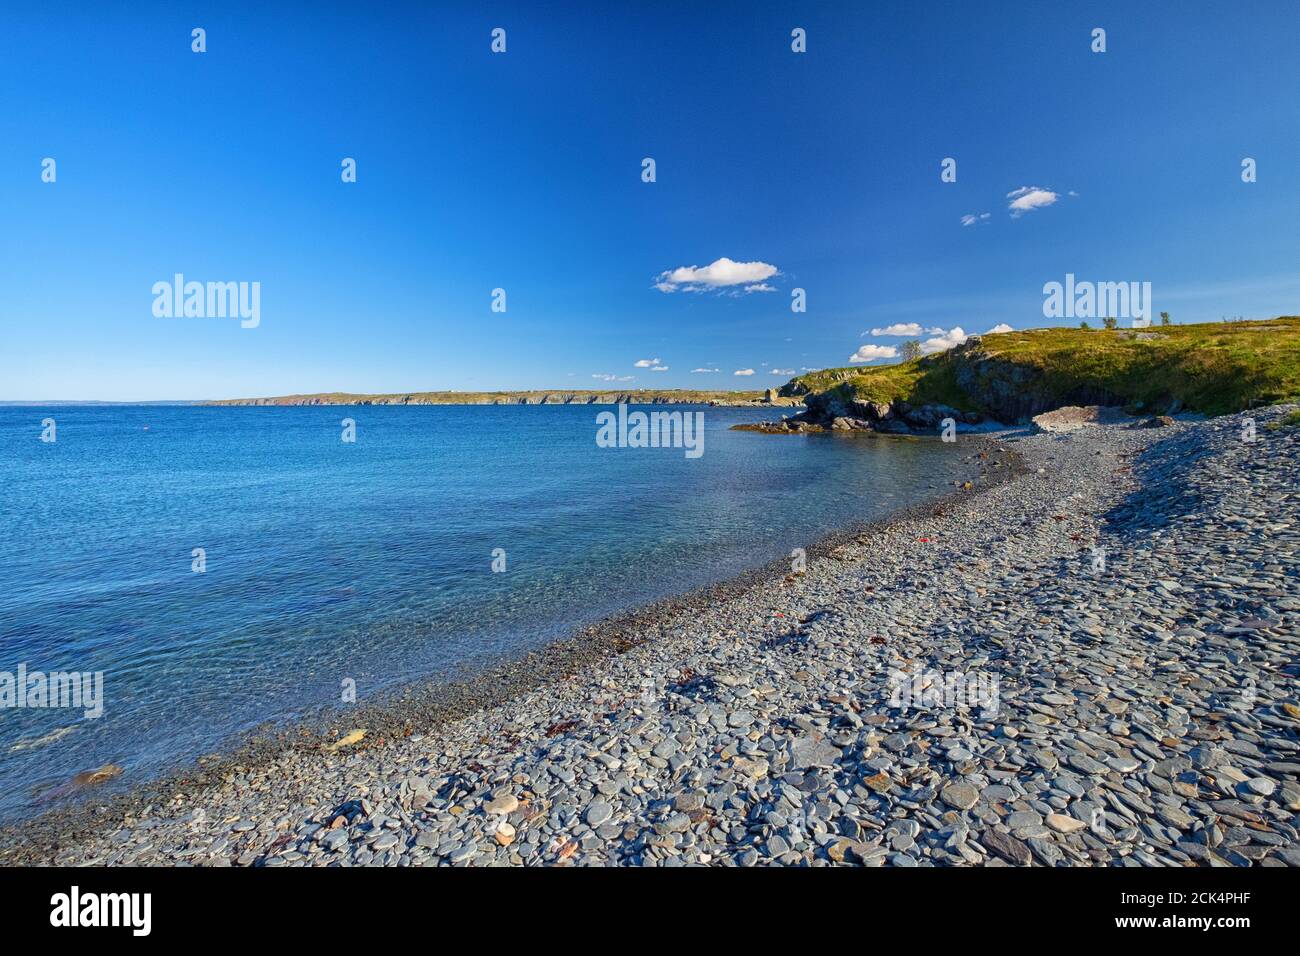 Bright blue sky with some white clouds over a pebble beach with some seaweed washed up on shore. There's a land mass or point at the end of the beach. Stock Photo